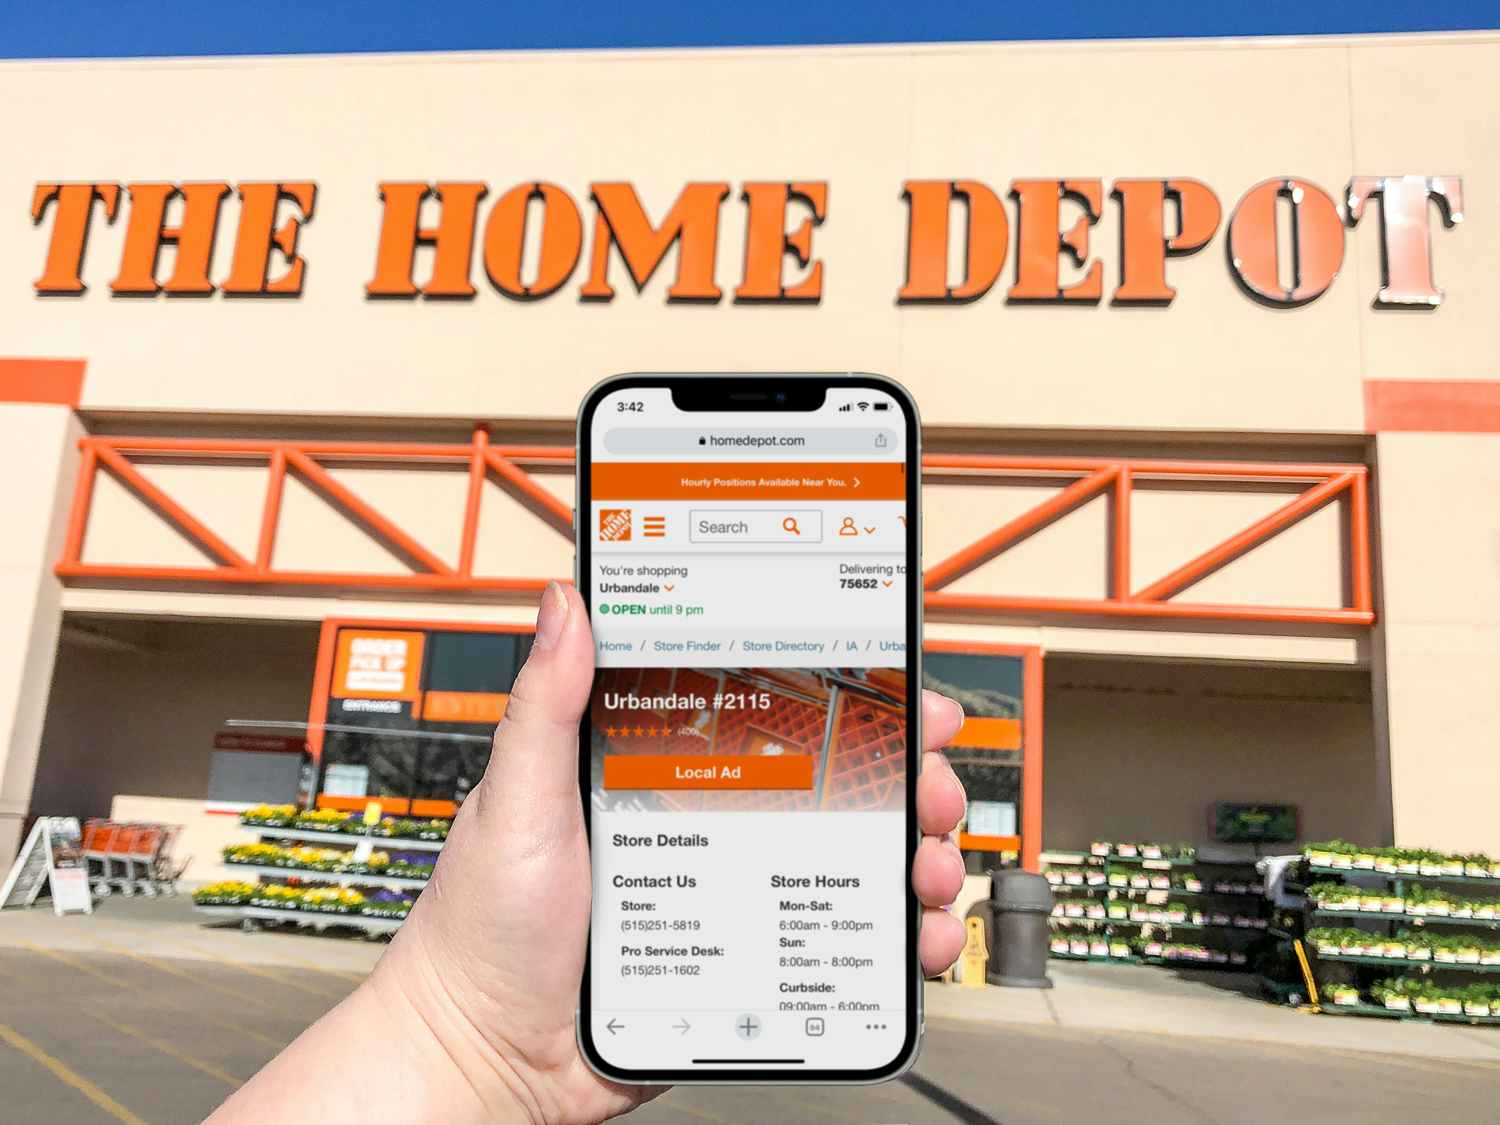 person in front of home depot store holding phone with website